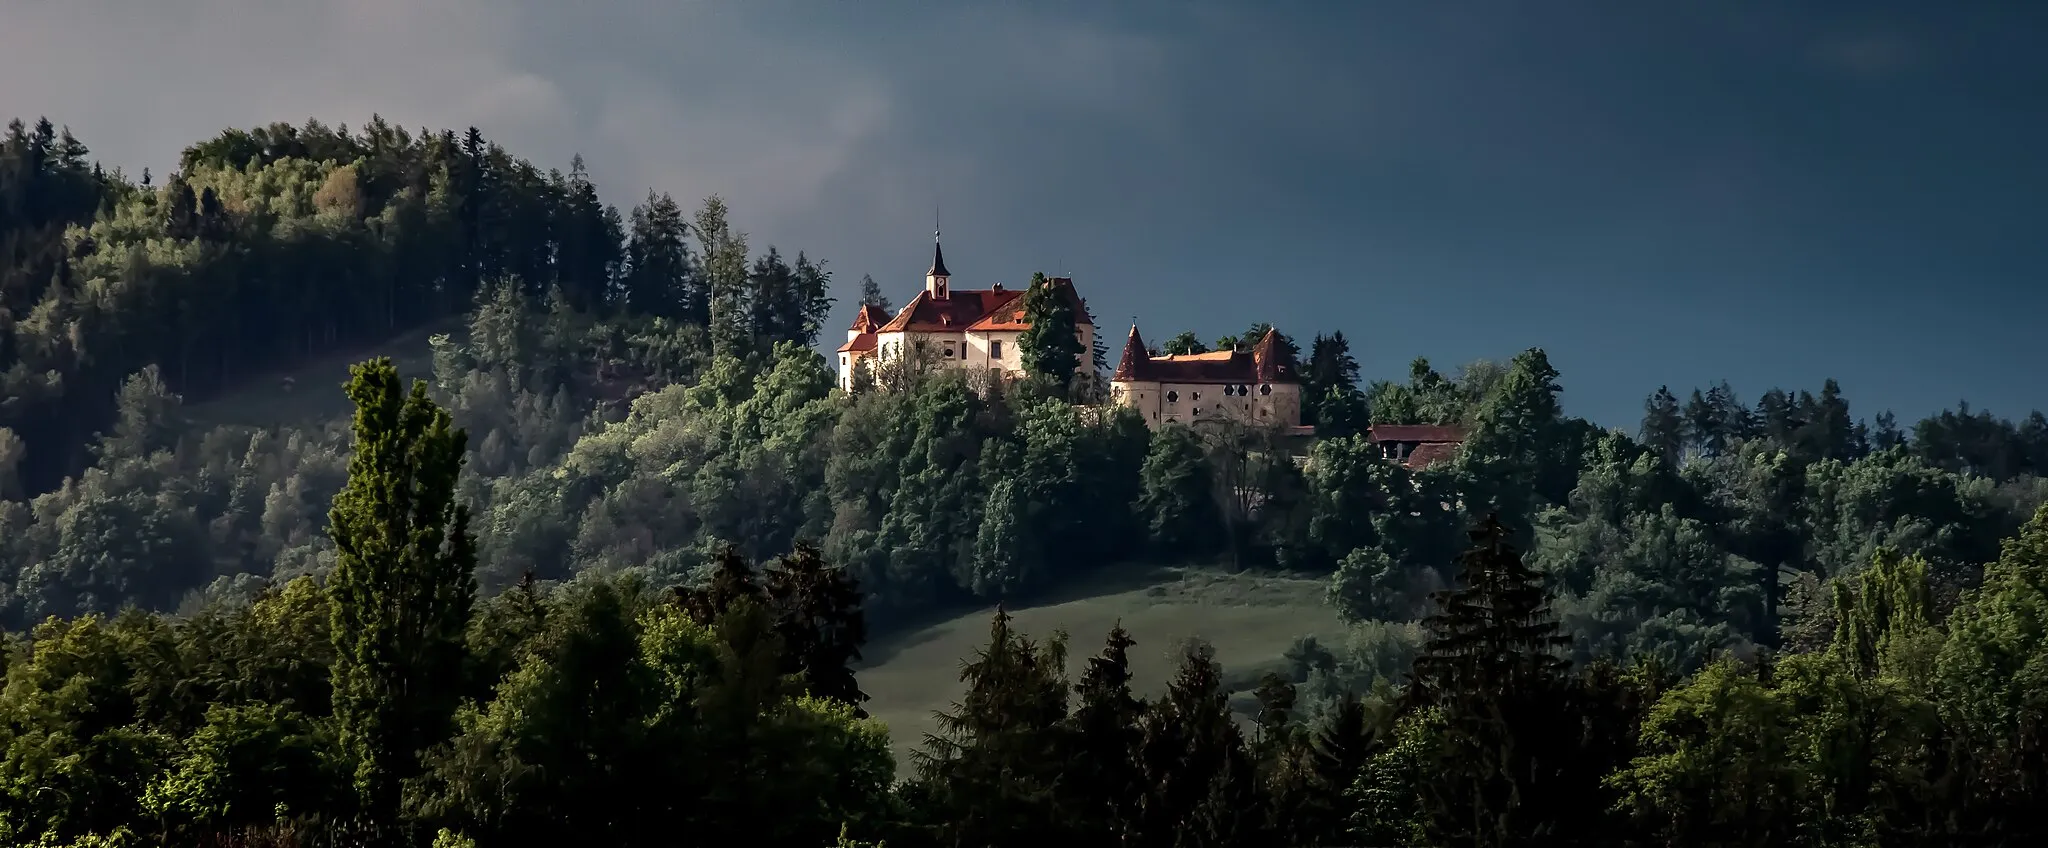 Photo showing: The castle Plankenwarth to the west of Graz, Austria, dates back to the 13th century. Its walls have a thickness of up to three meters. The medieval castle was expanded in the 18th century and is now a private property. According to a legend, the name of the castle derives from the fact that an unpopular landlord was slain by his subjects with planks. In fact, the name comes from the old-german word "planch", meaning "shiny", which refers to the originally magnificent interior of the castle.